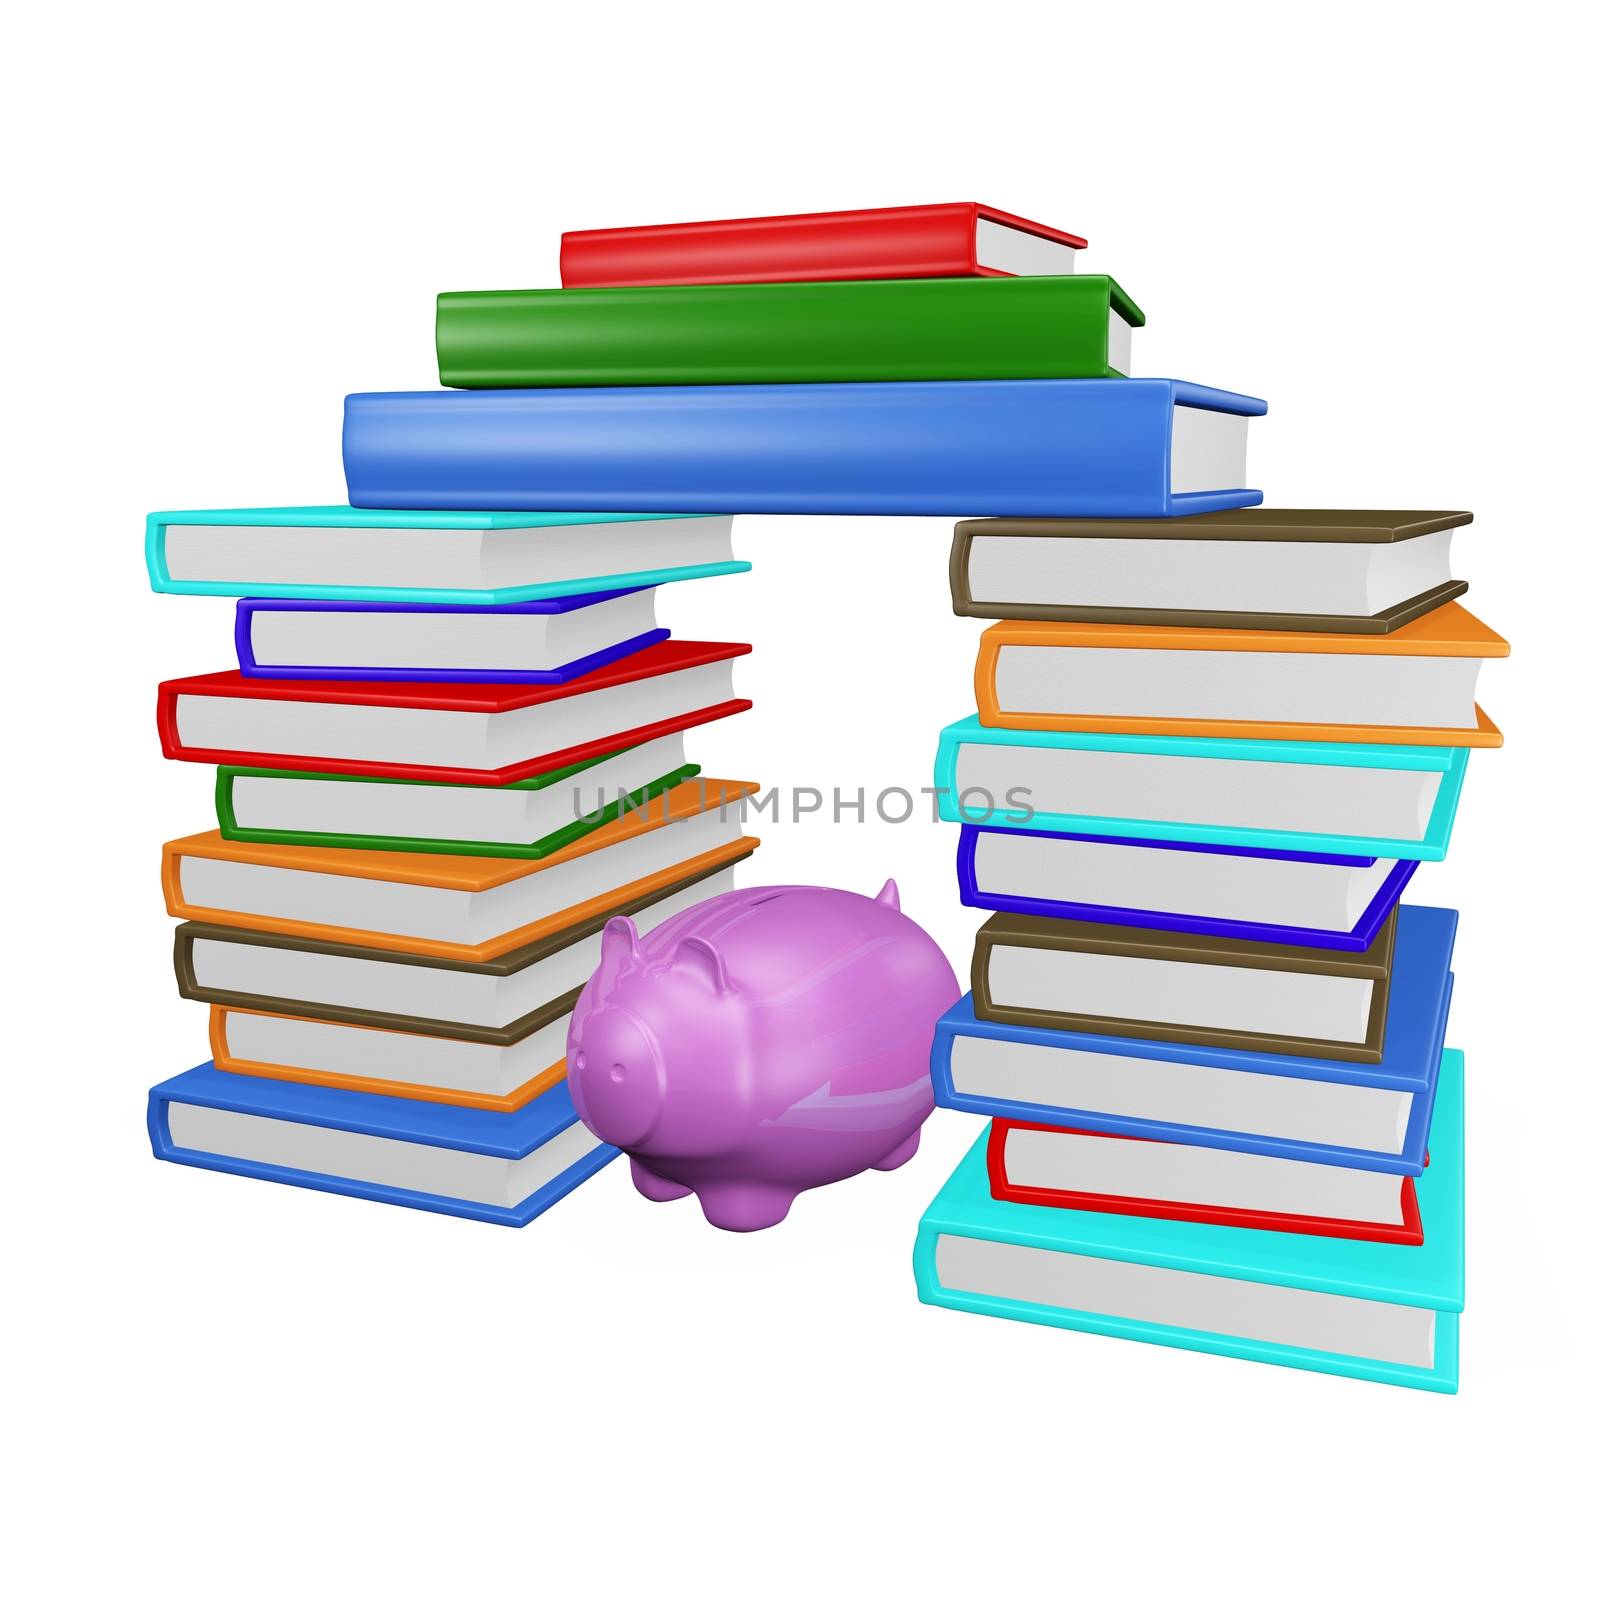 Saving Piggy Bank in Stacks of Books by RichieThakur